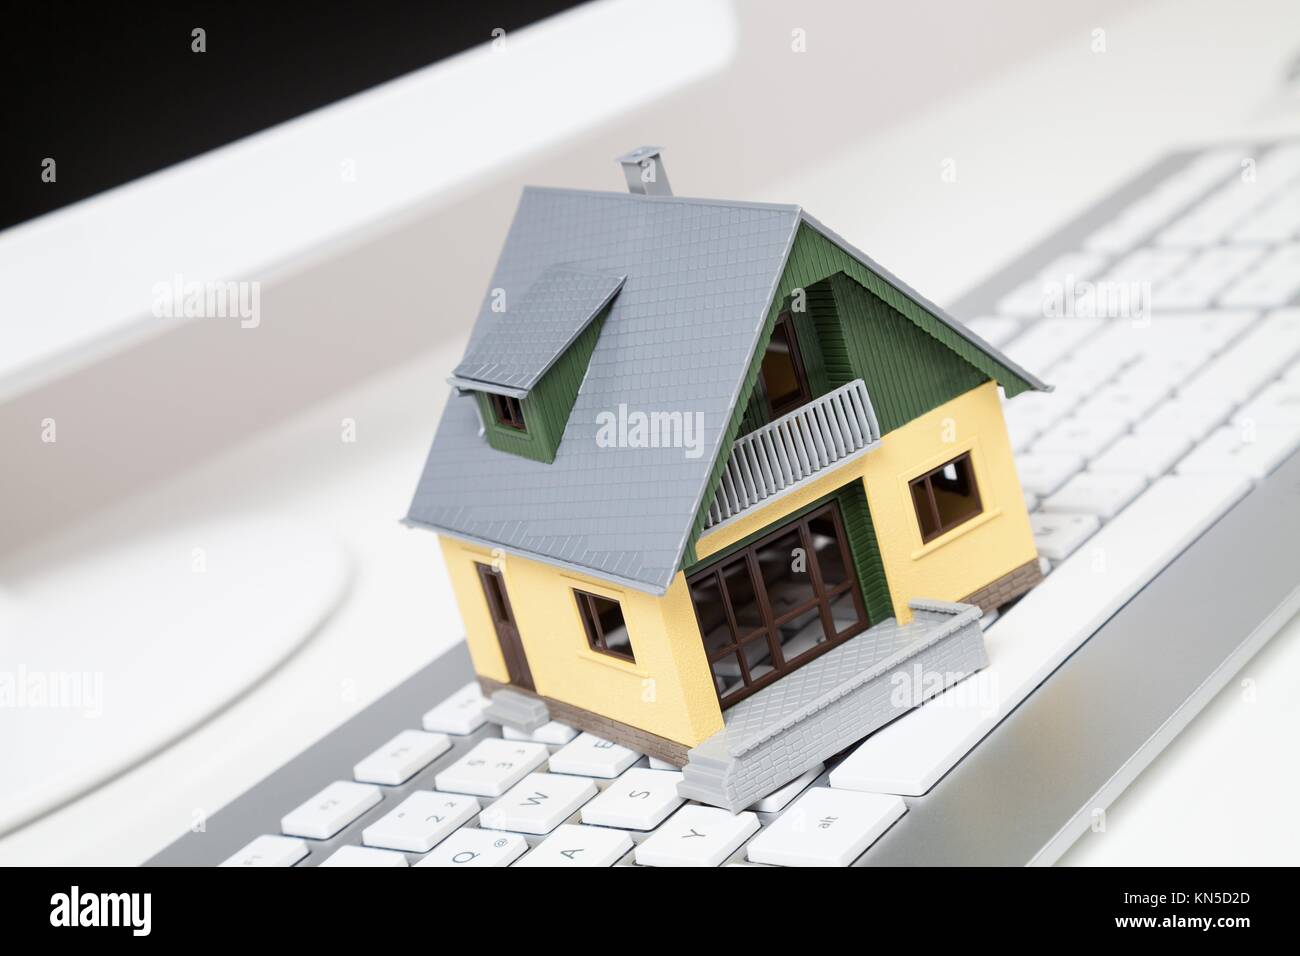 house on a computer keyboard. Stock Photo